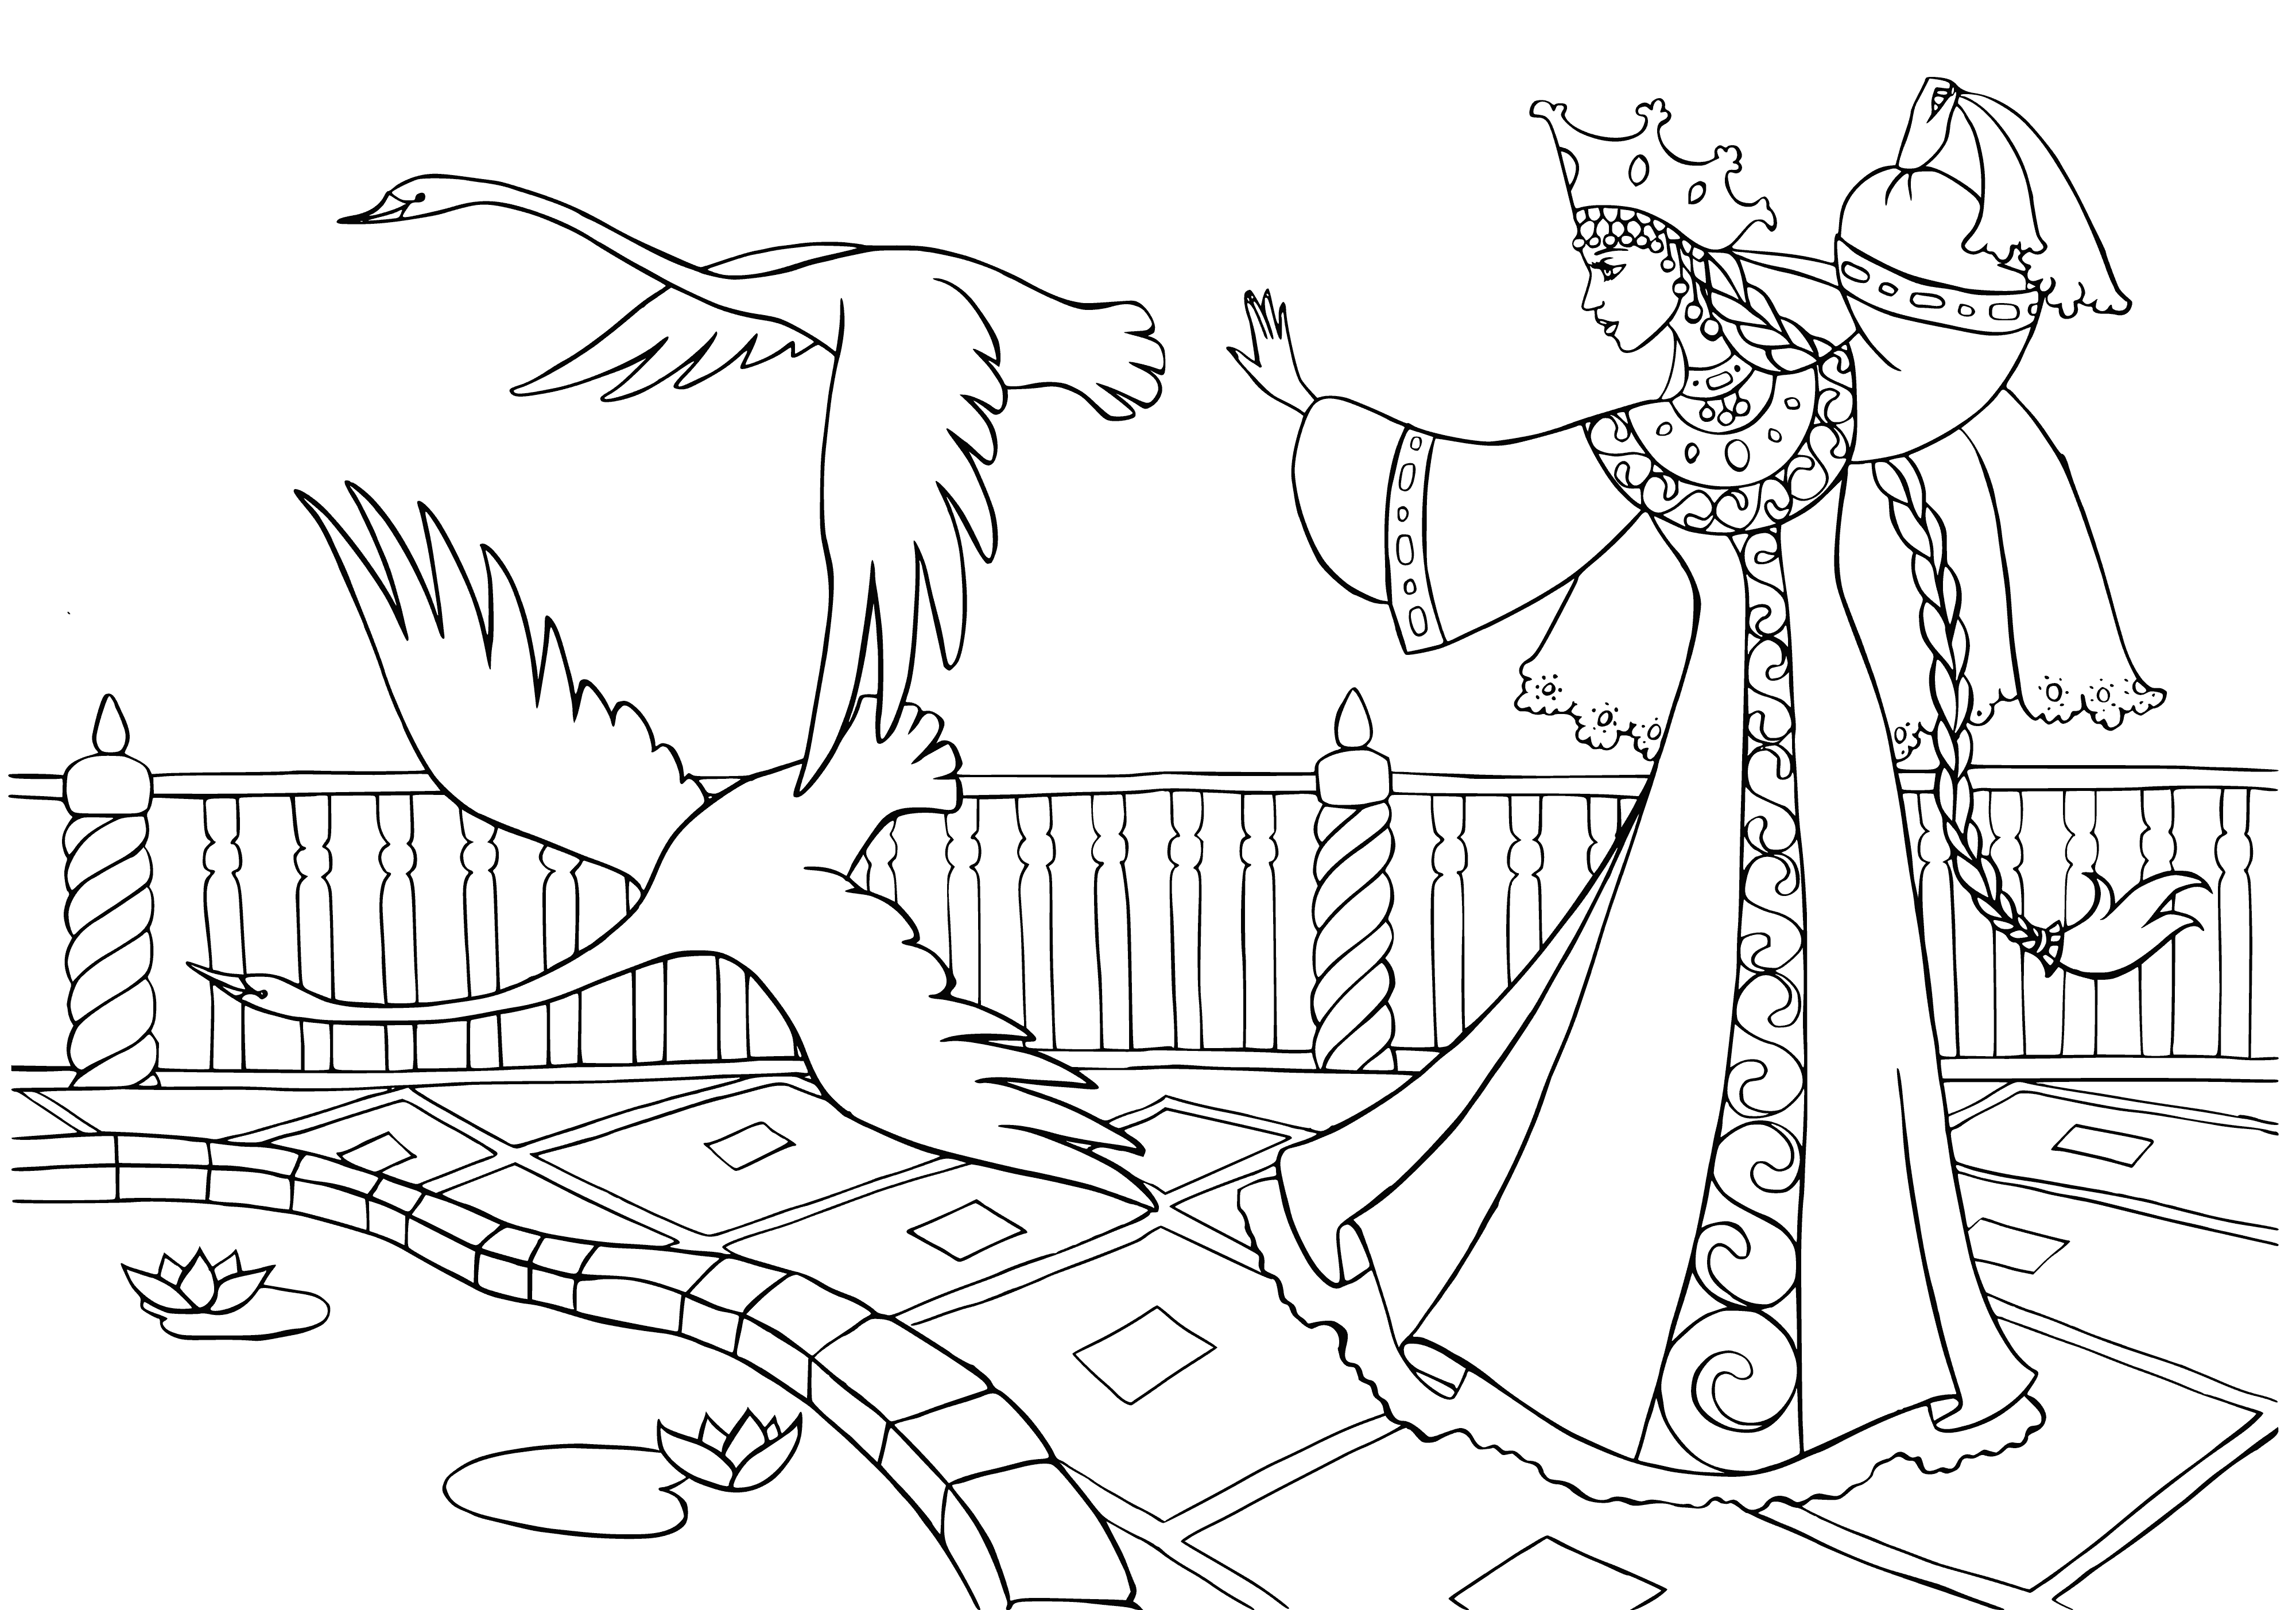 coloring page: Princess rules kindly & fairly, ensuring all people's needs are met. Loved by all, the kingdom is peaceful & content.